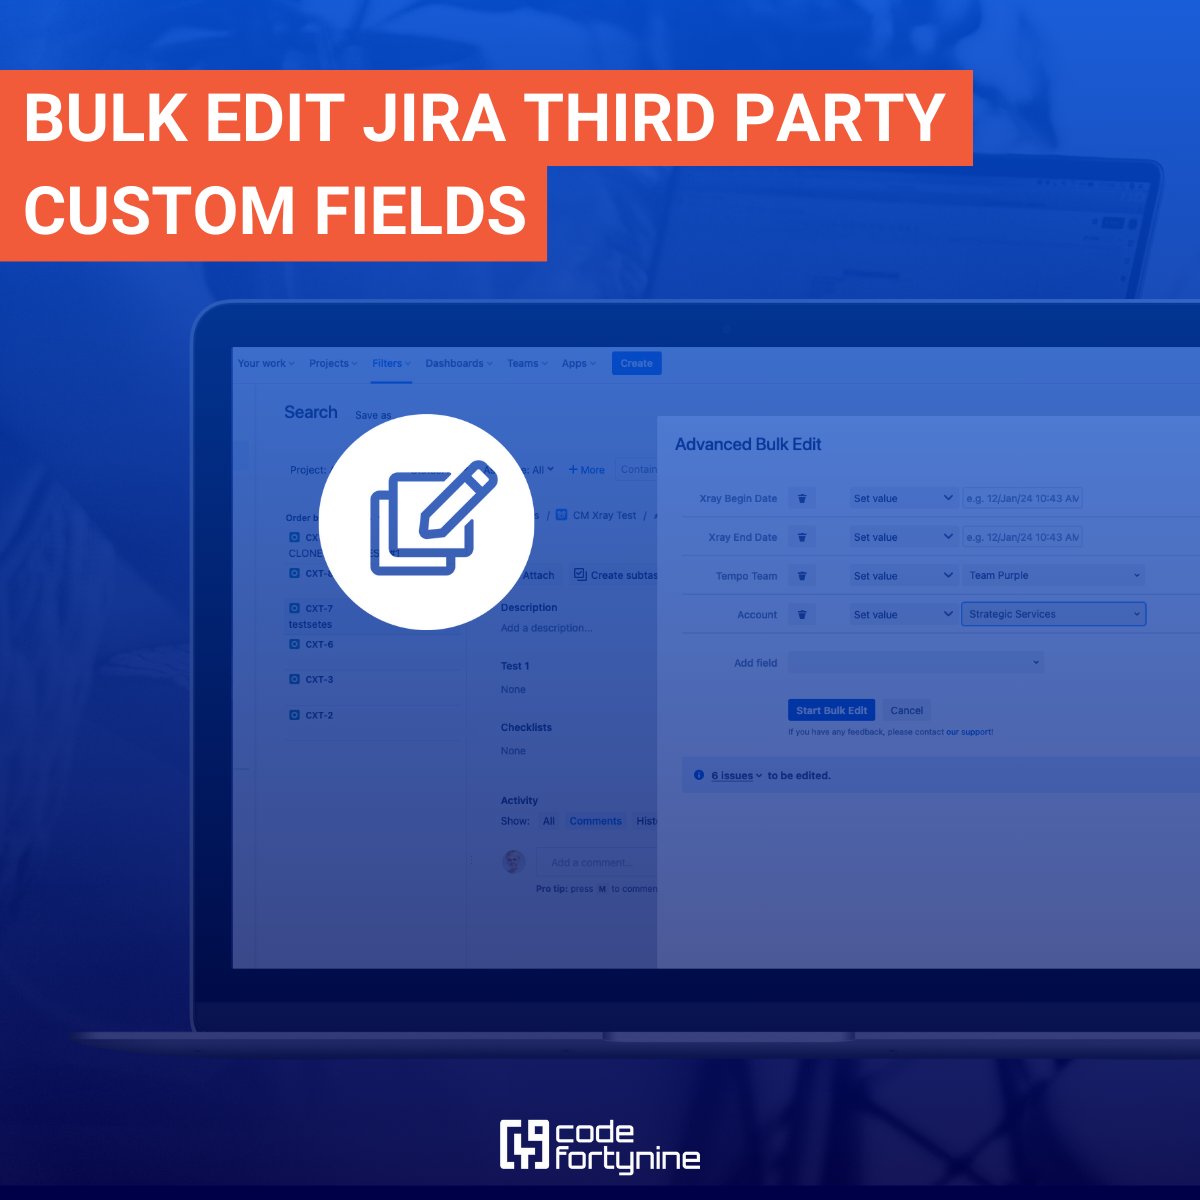 ℹ️ With Deep Clone and Advanced Bulk Edit for Jira, you have the ability to bulk edit Jira Custom Fields created by third-party apps.
Select options within these fields to gain full control. 

This covers fields such as @XrayApp Date Fields and @TempoHQ Account or Team Fields.